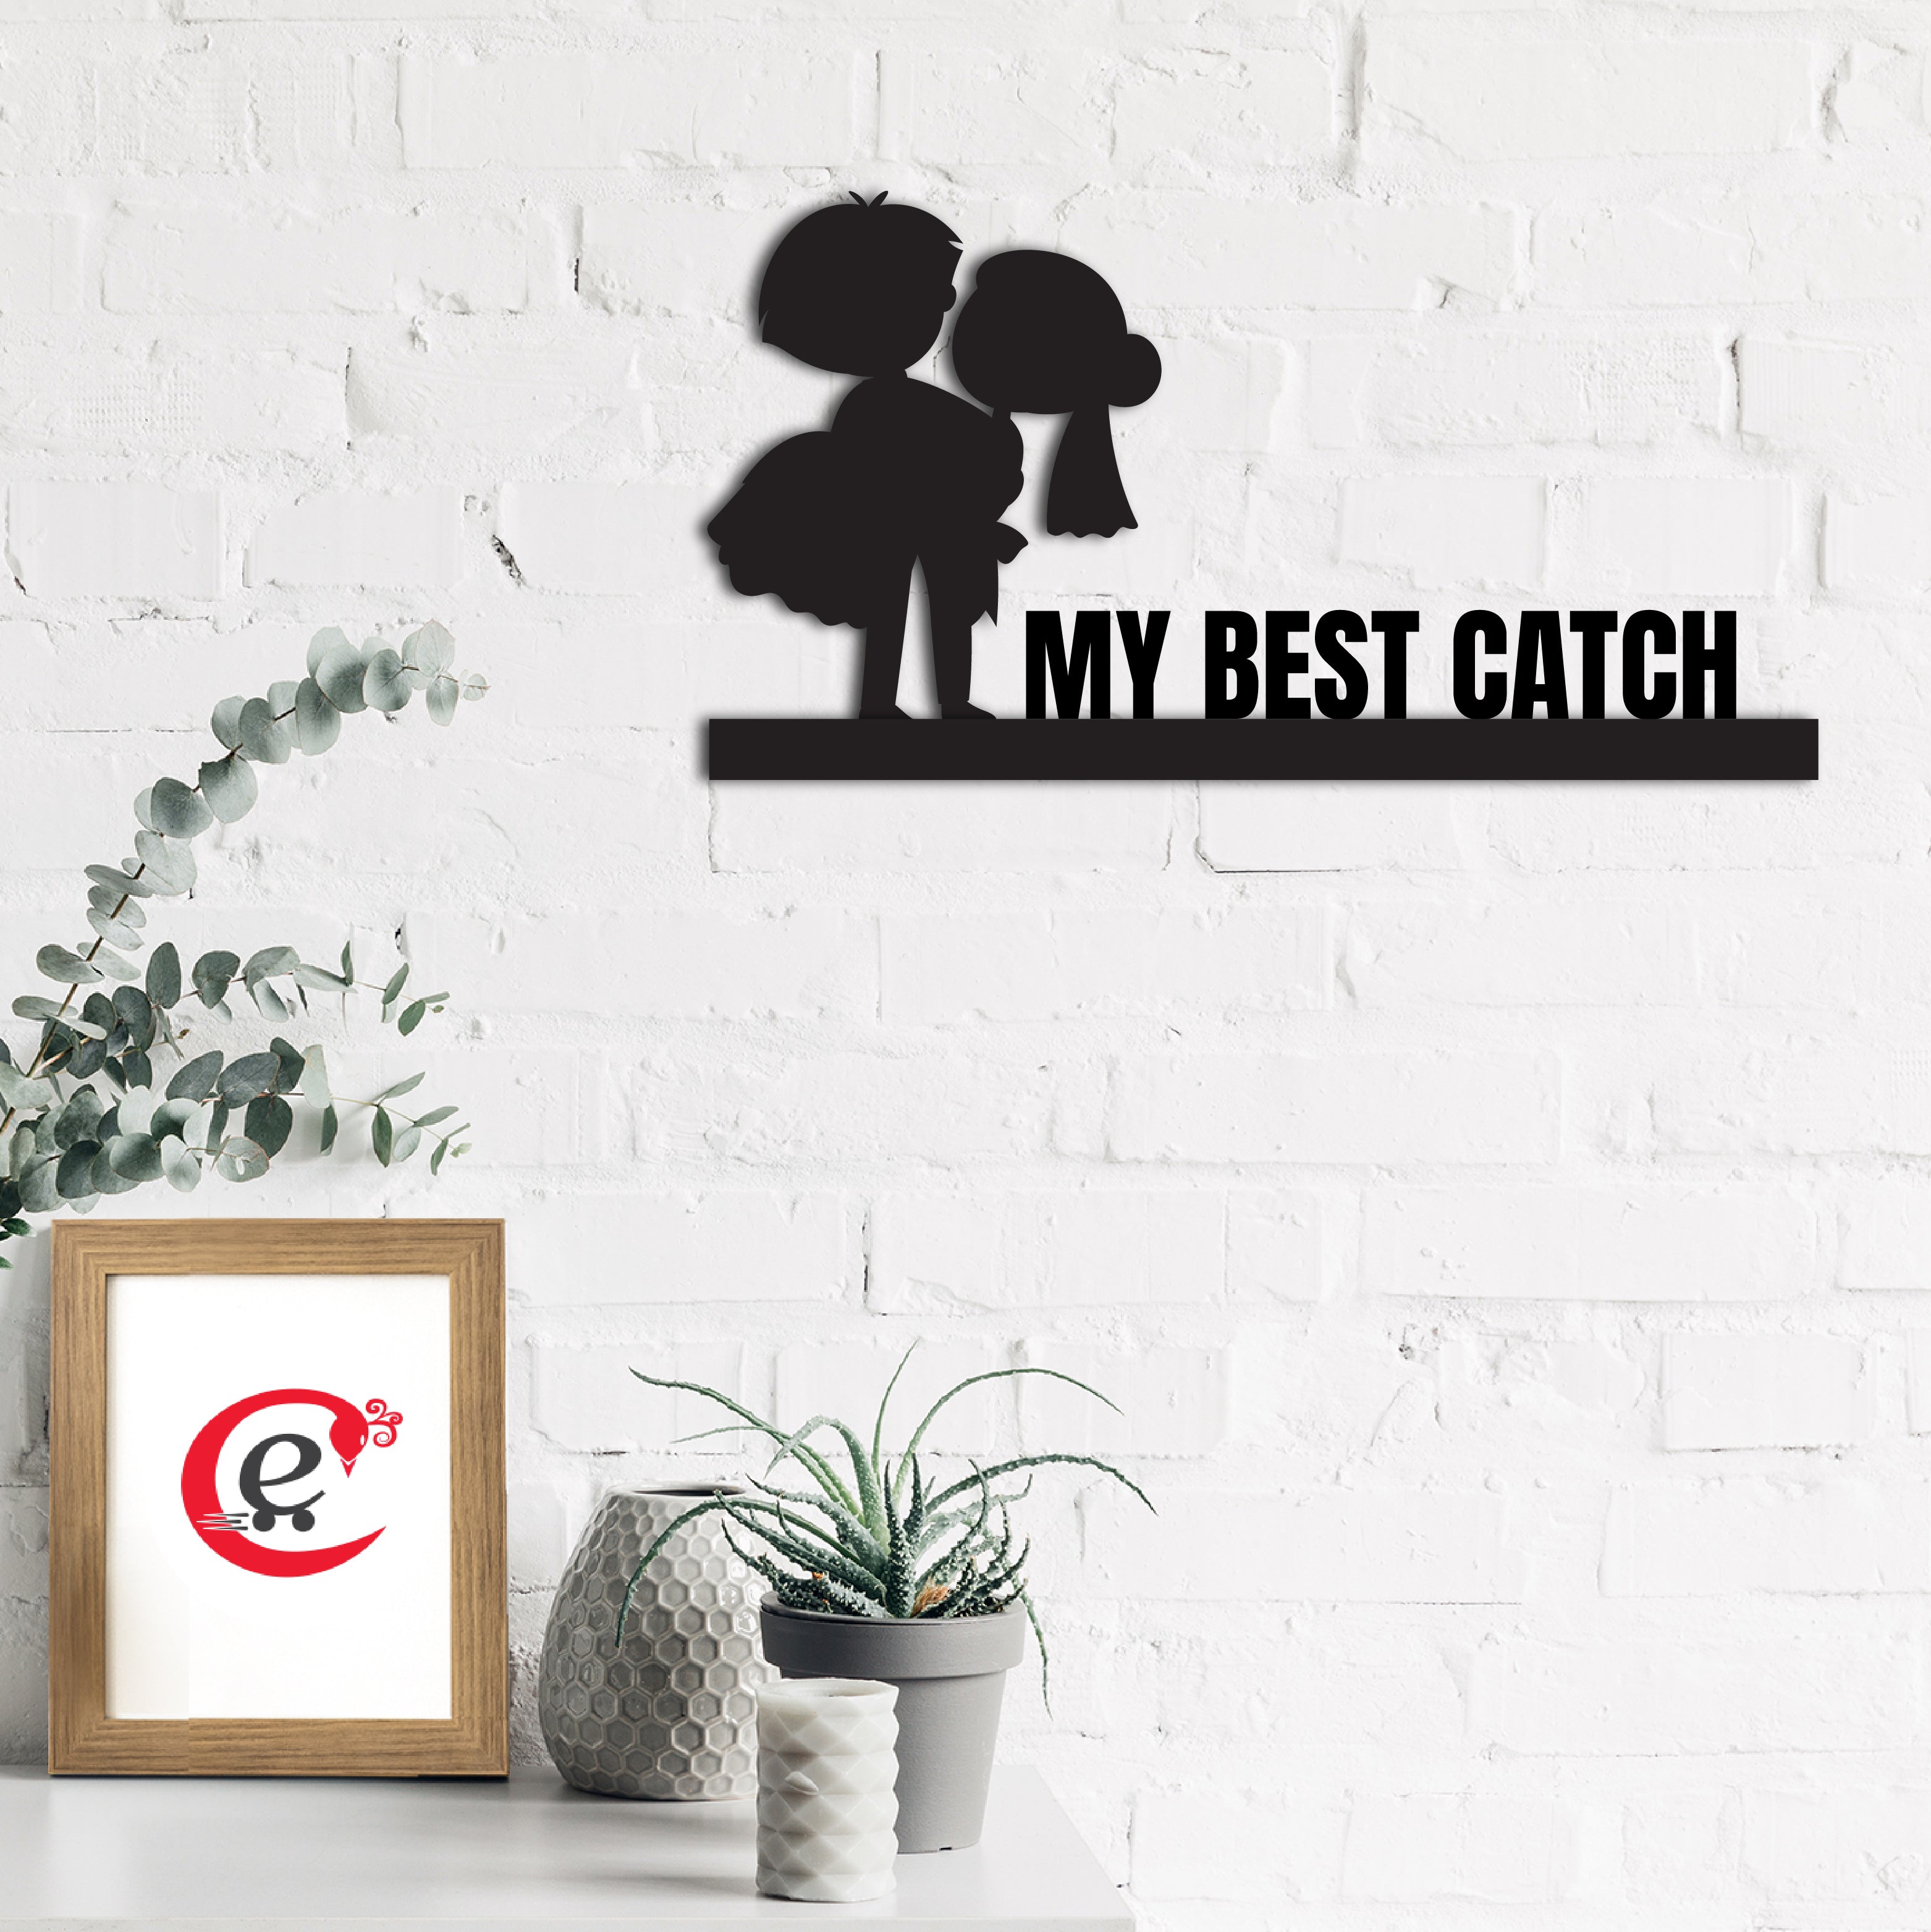 "My Best Catch" Black Engineered Wood Wall Art Cutout, Ready to Hang Home Decor